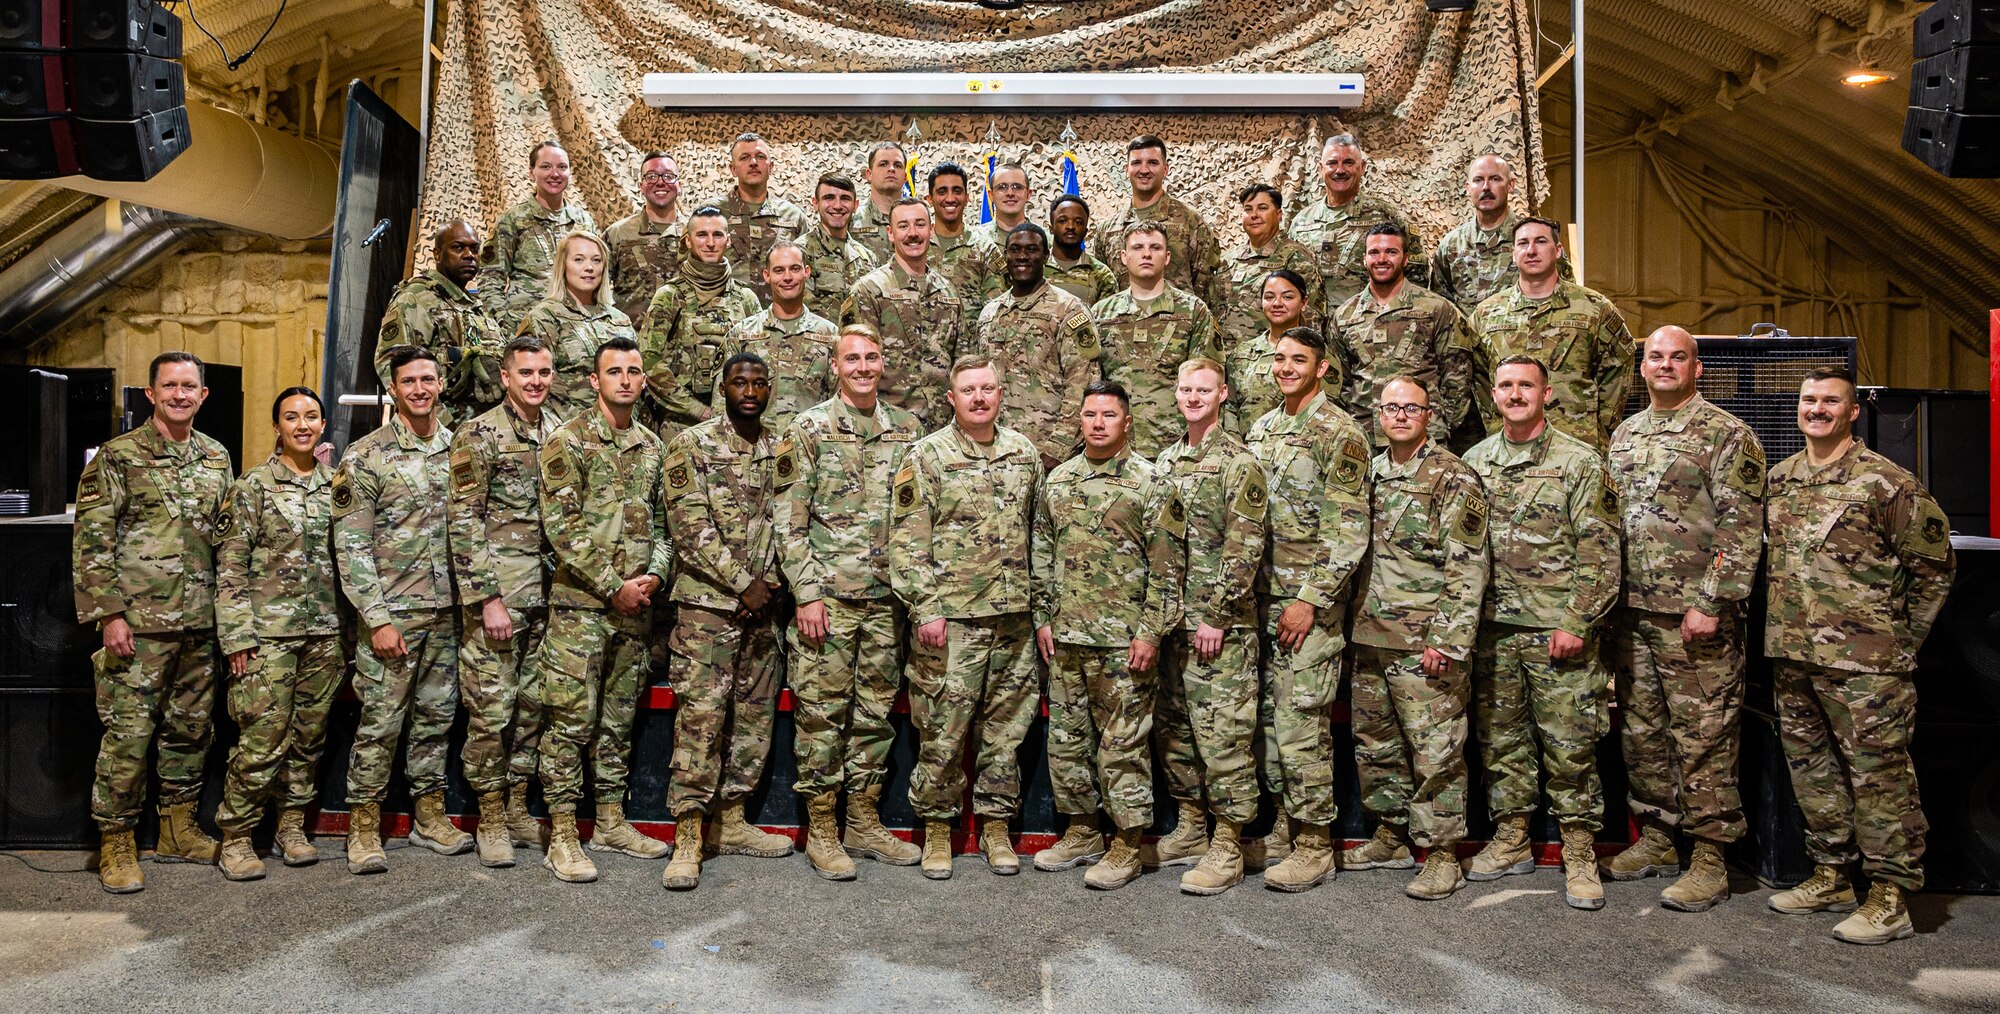 332d Air Expeditionary Wing leadership and Airpower Leadership Academy instructors pose alongside ALA graduates at an undisclosed location in Southwest Asia, June 18, 2022. ALA is a nine-week leadership program for select 332d Air Expeditionary Wing noncommissioned officers designed to cultivate future leaders. (U.S. Air Force photo by Master Sgt. Christopher Parr)